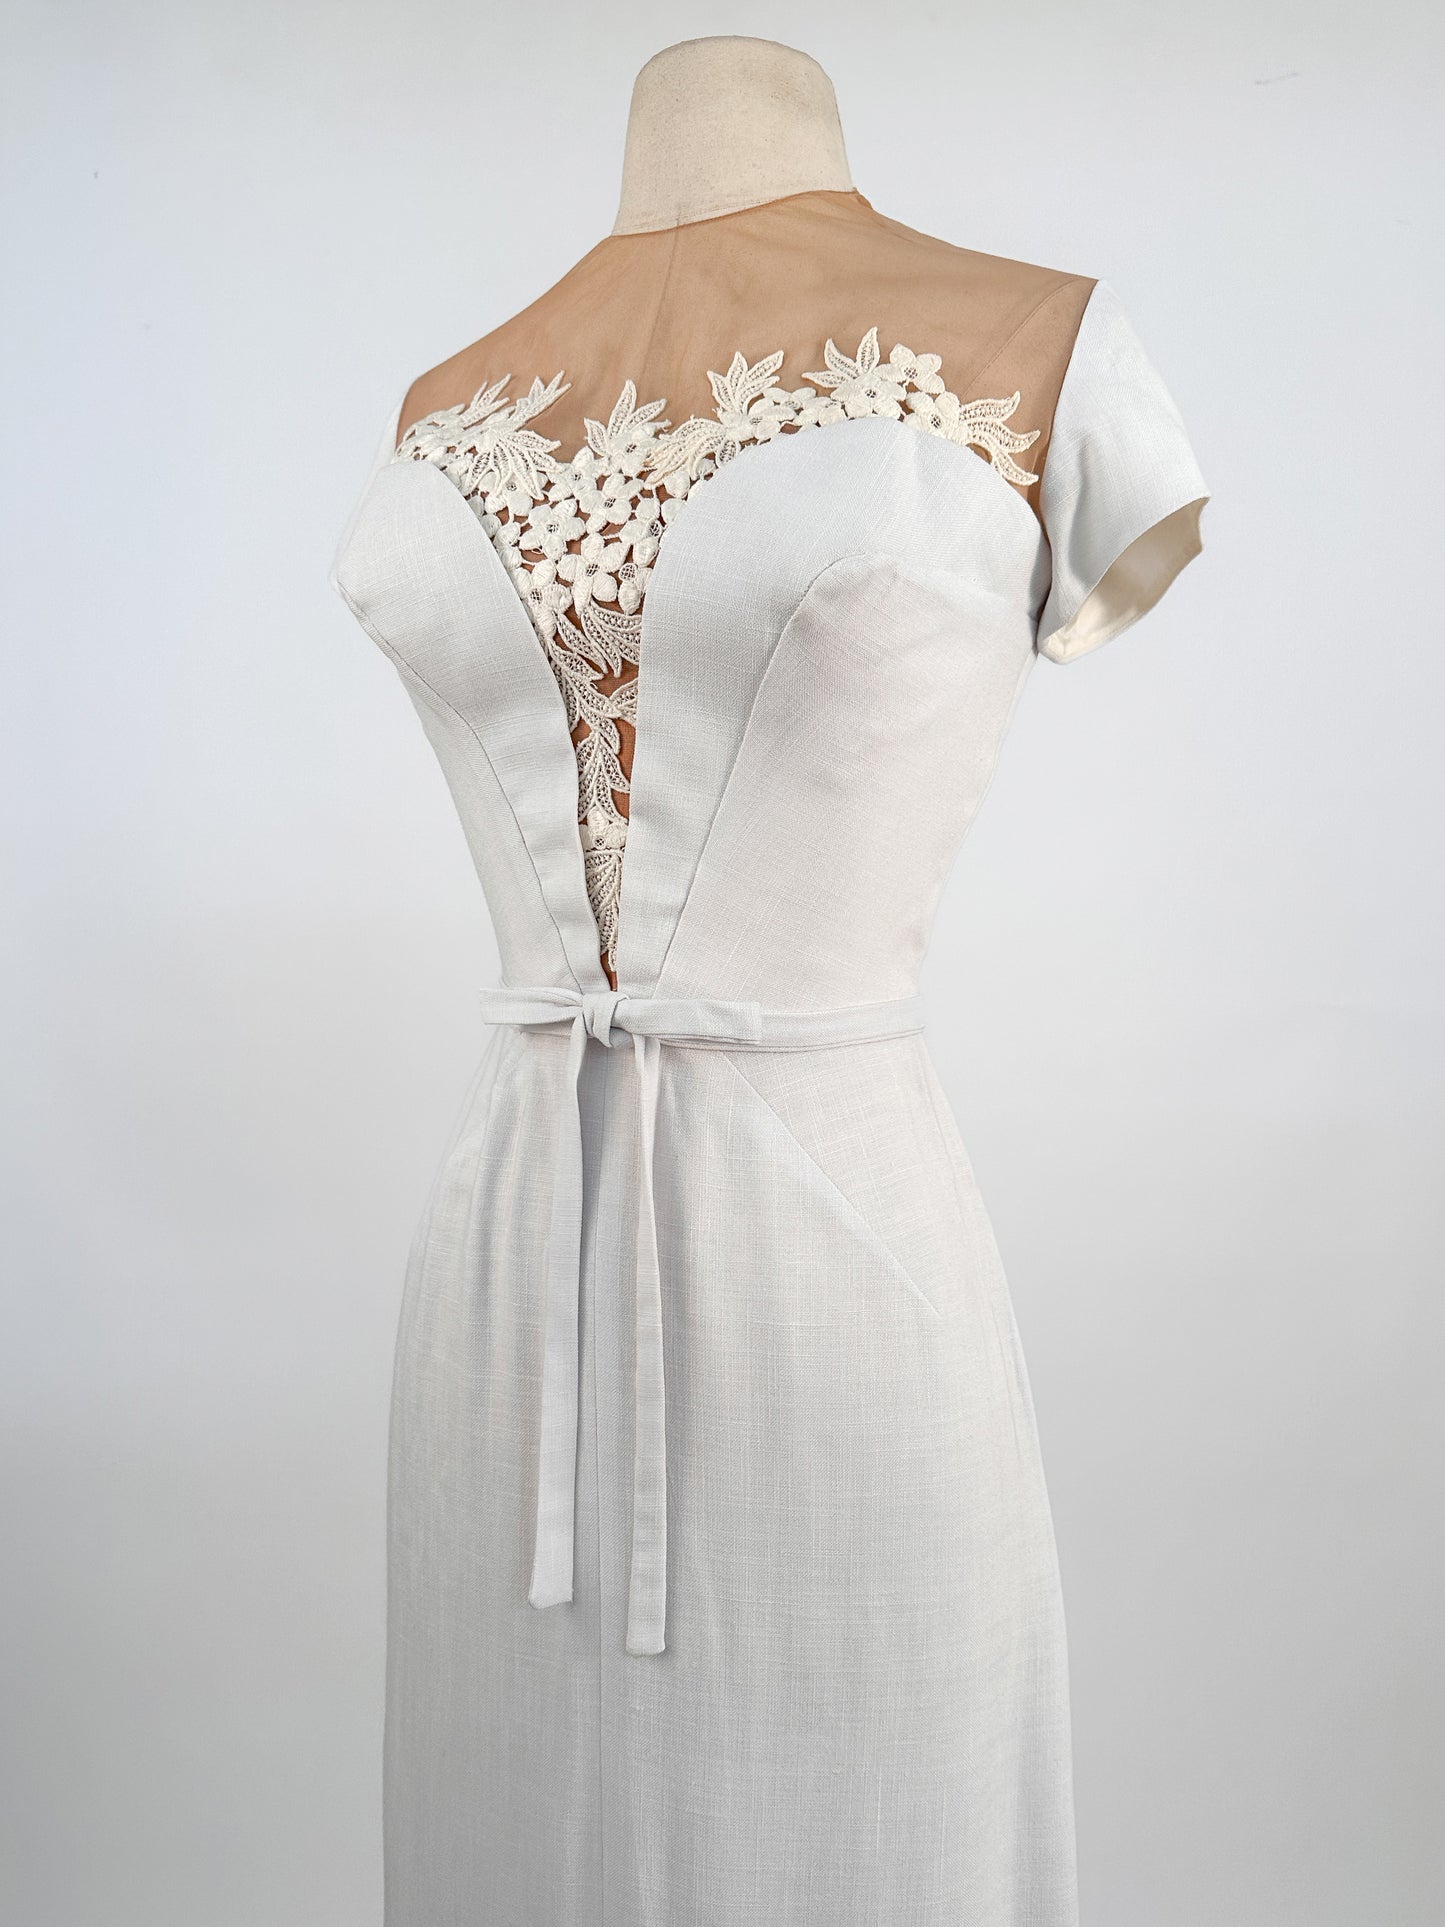 1950s Linen Wiggle Dress with Illusion Neckline by Peggy Hunt / Waist 24